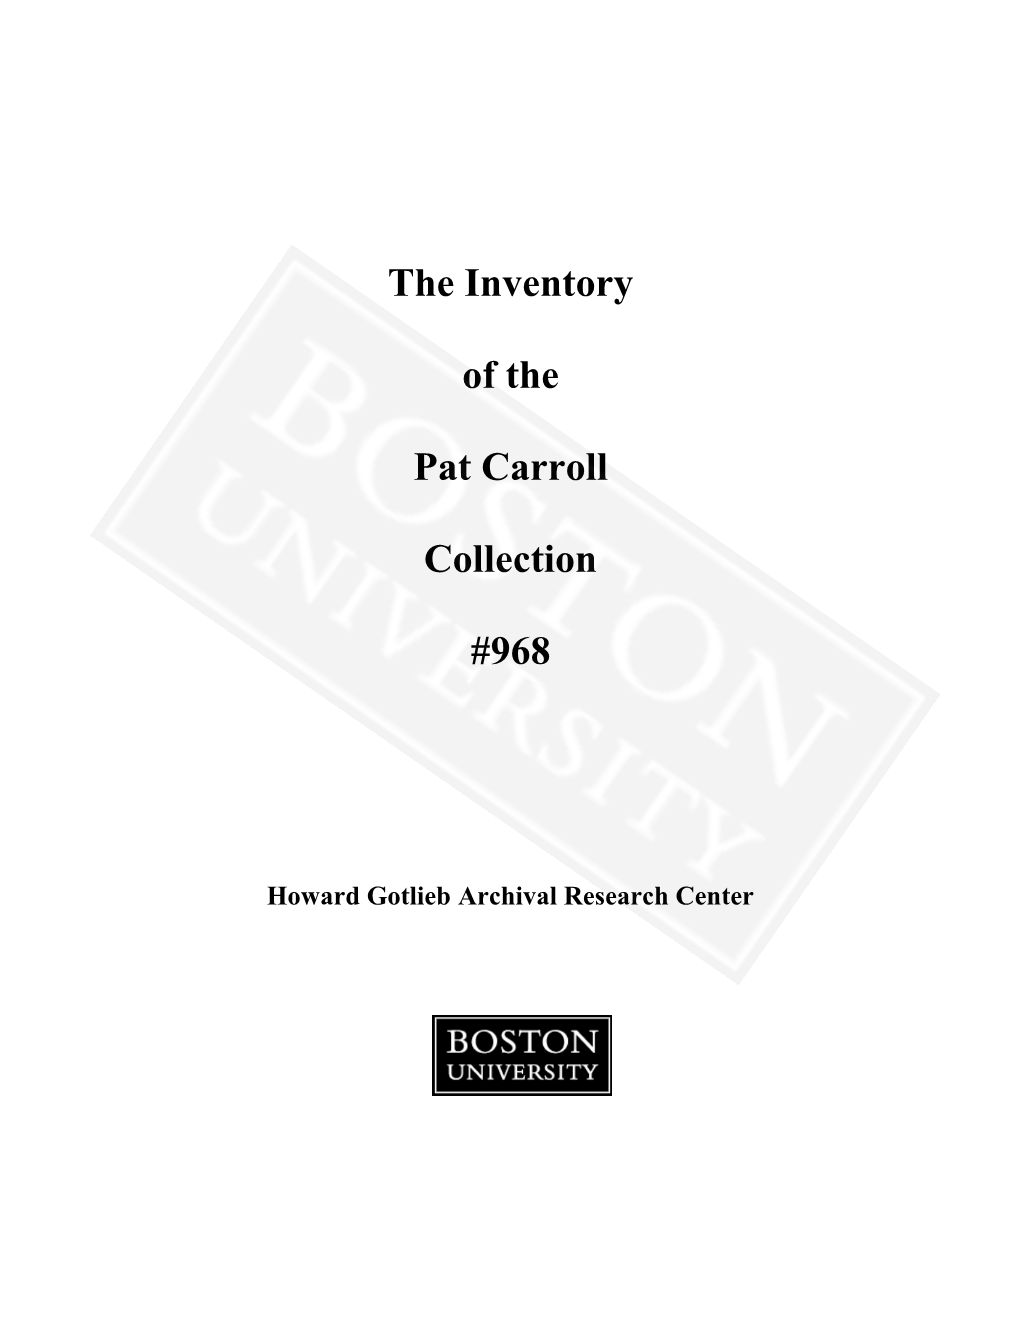 The Inventory of the Pat Carroll Collection #968